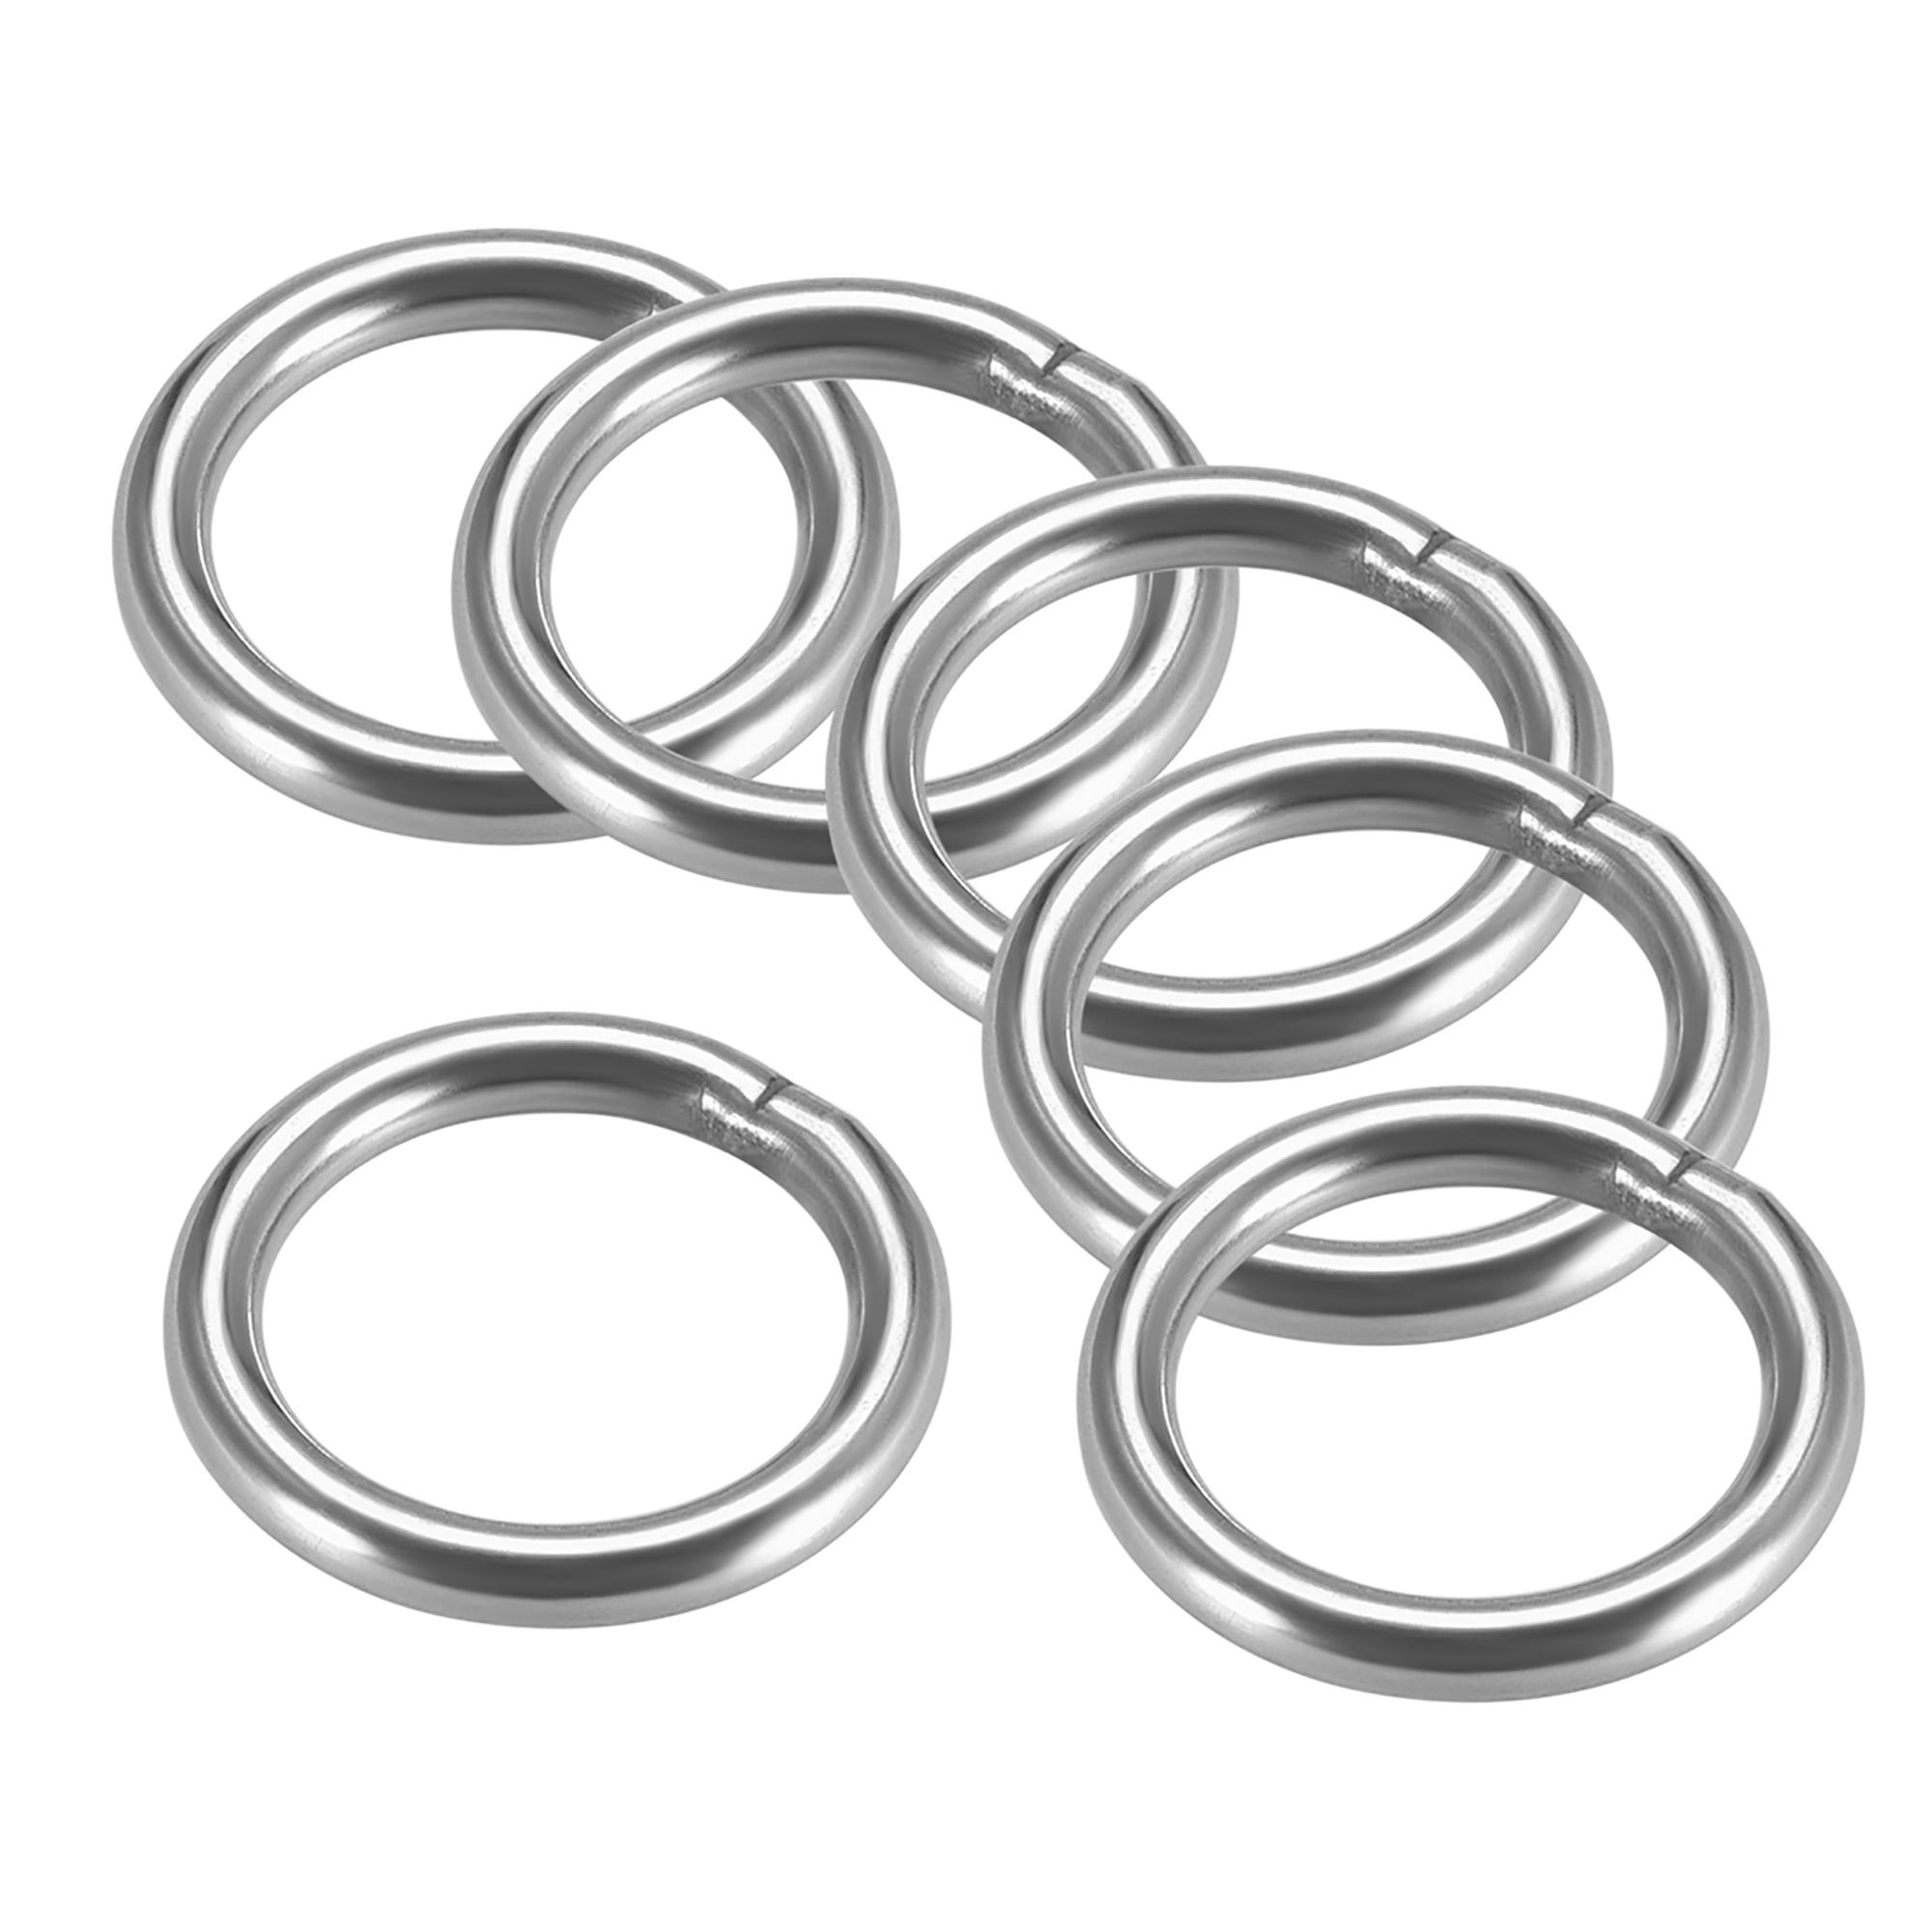 Stainless steel approx 30 x 4 MM welded 25 Round Rings 